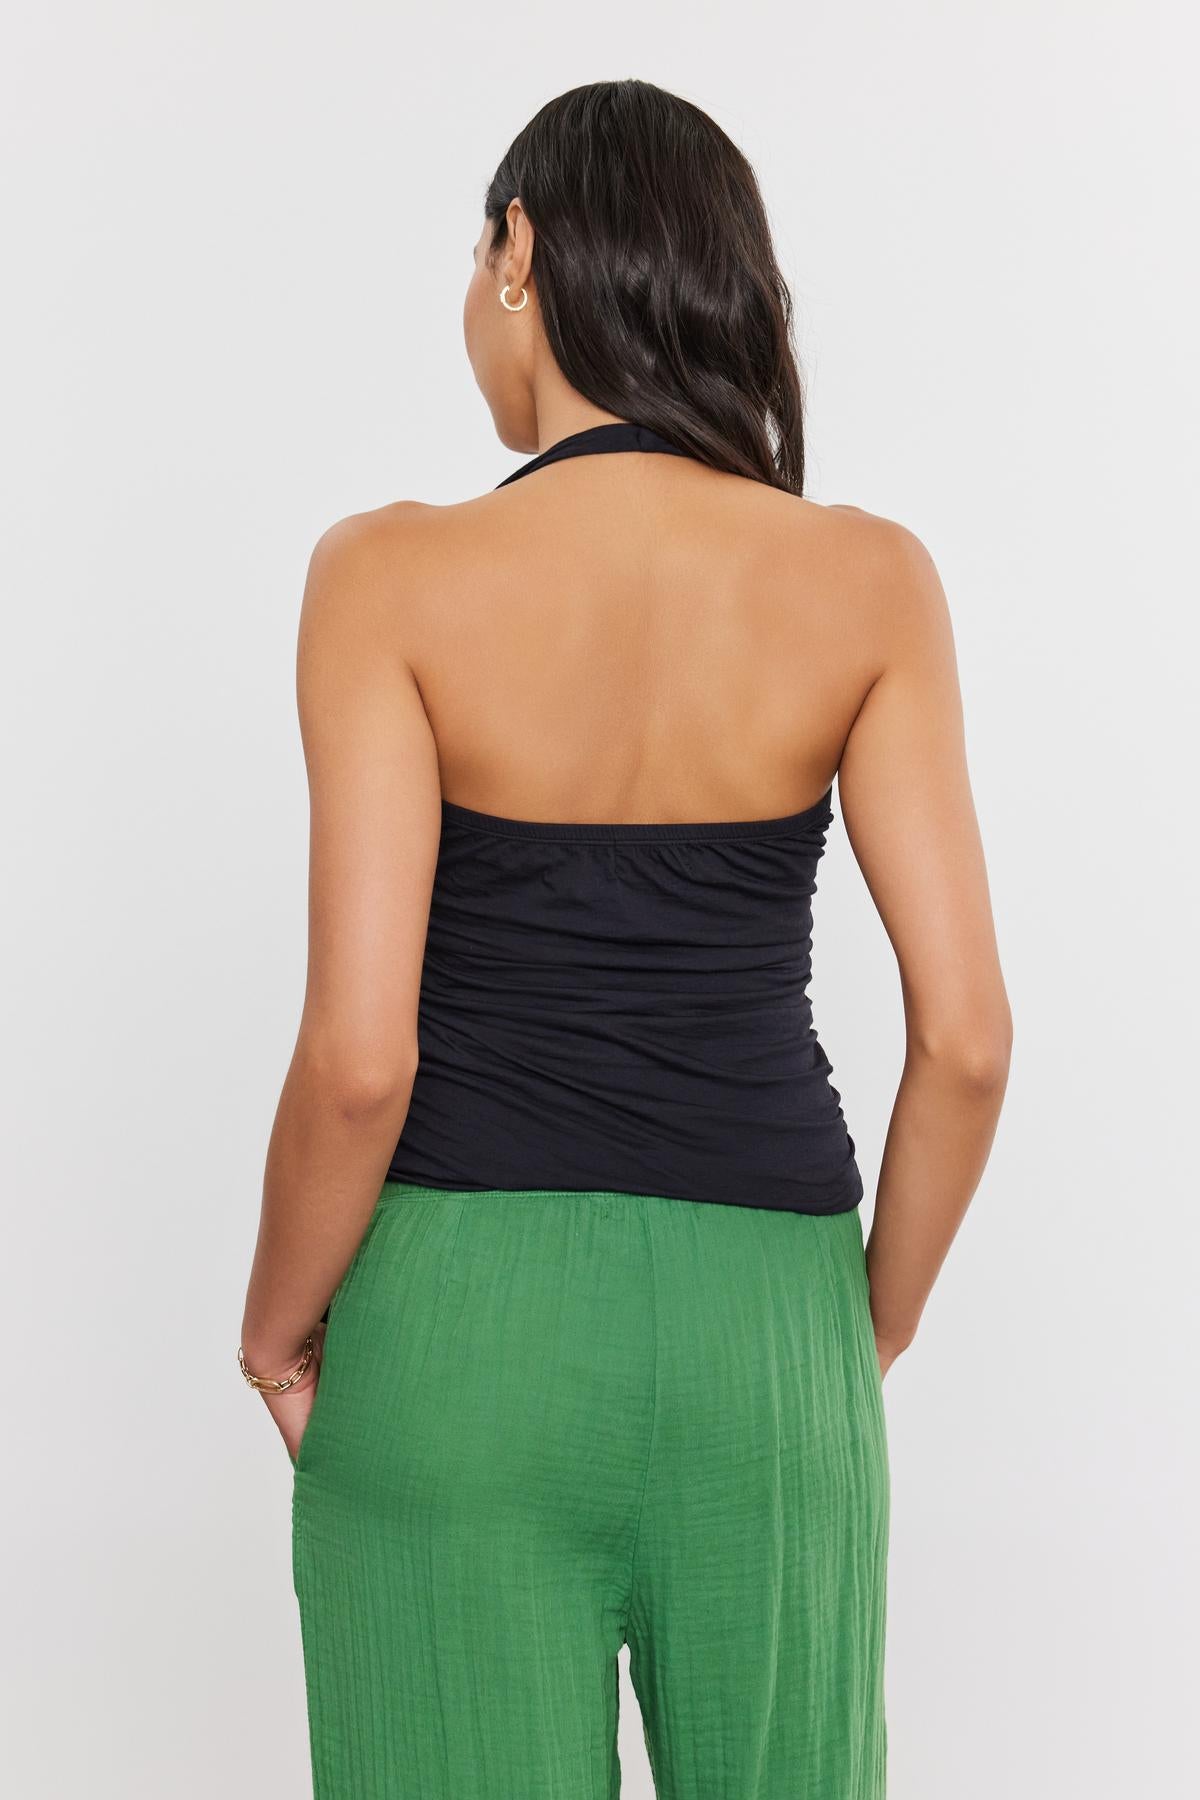   A person with long dark hair is shown from behind, wearing a Velvet by Graham & Spencer WHITLEY TANK TOP and green pants against a white background. 